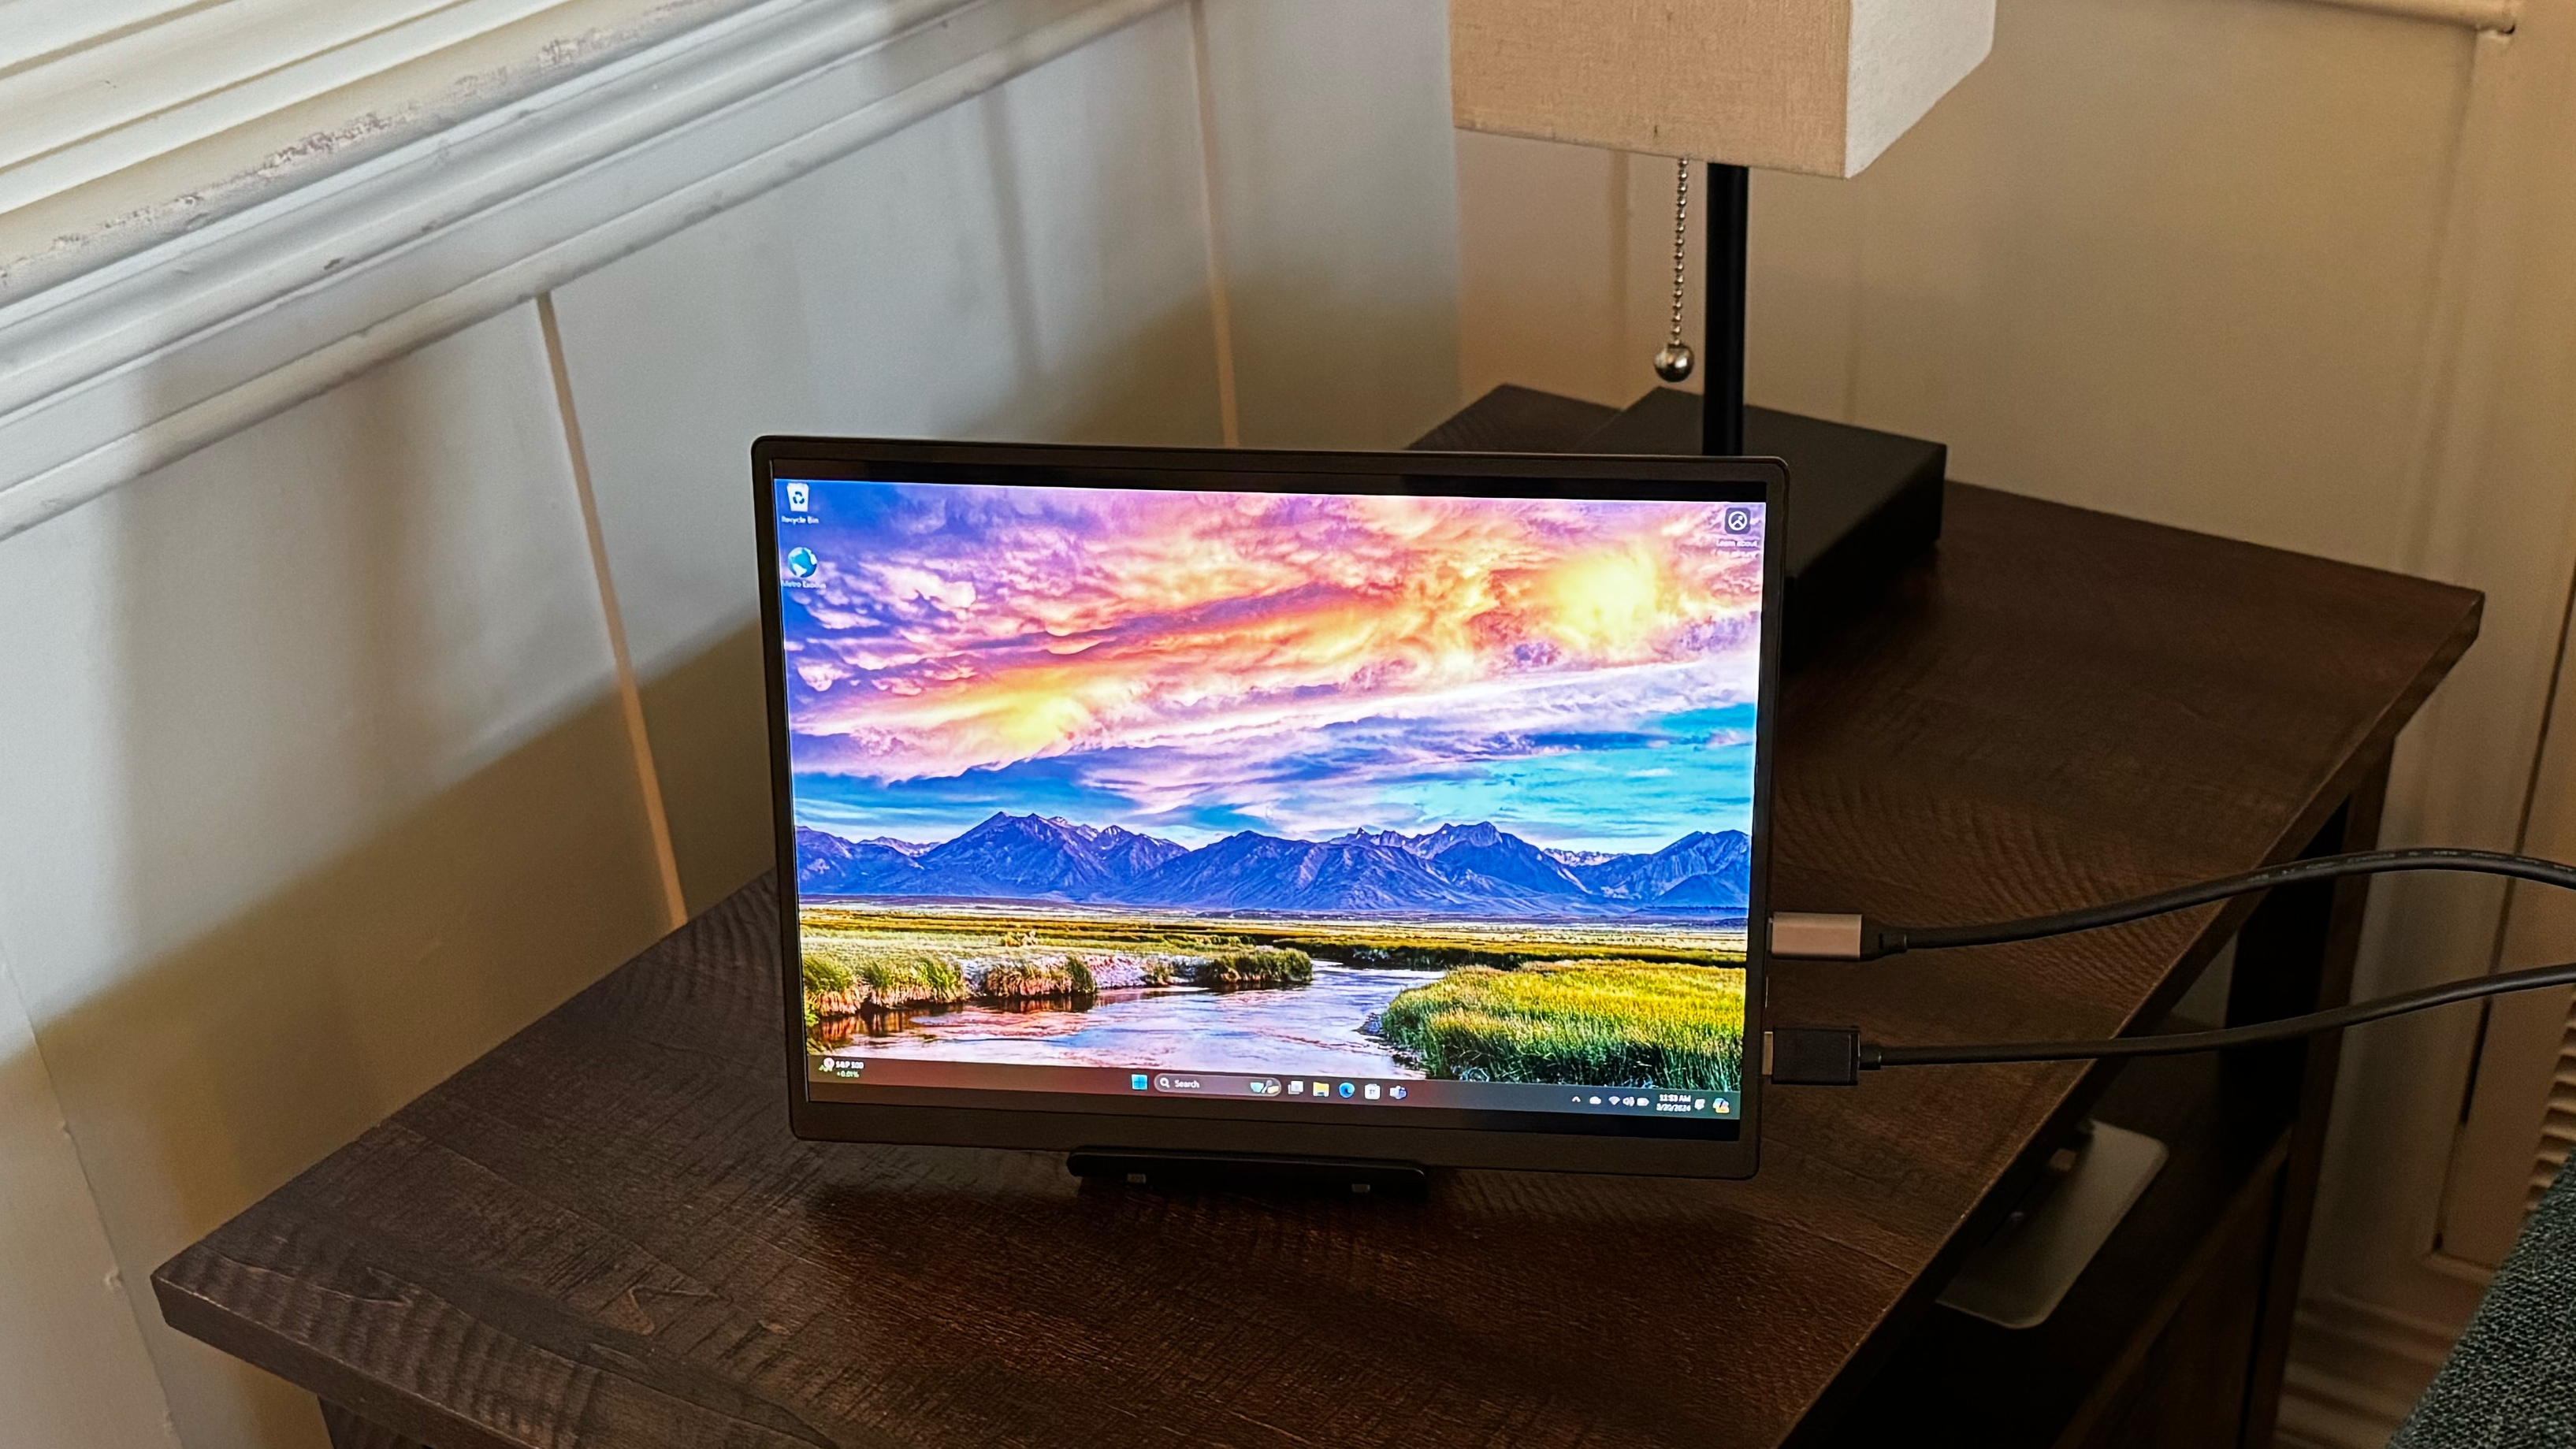 Eyoyo EM105 10.5-inch portable monitor review: Tiny in stature, big on value